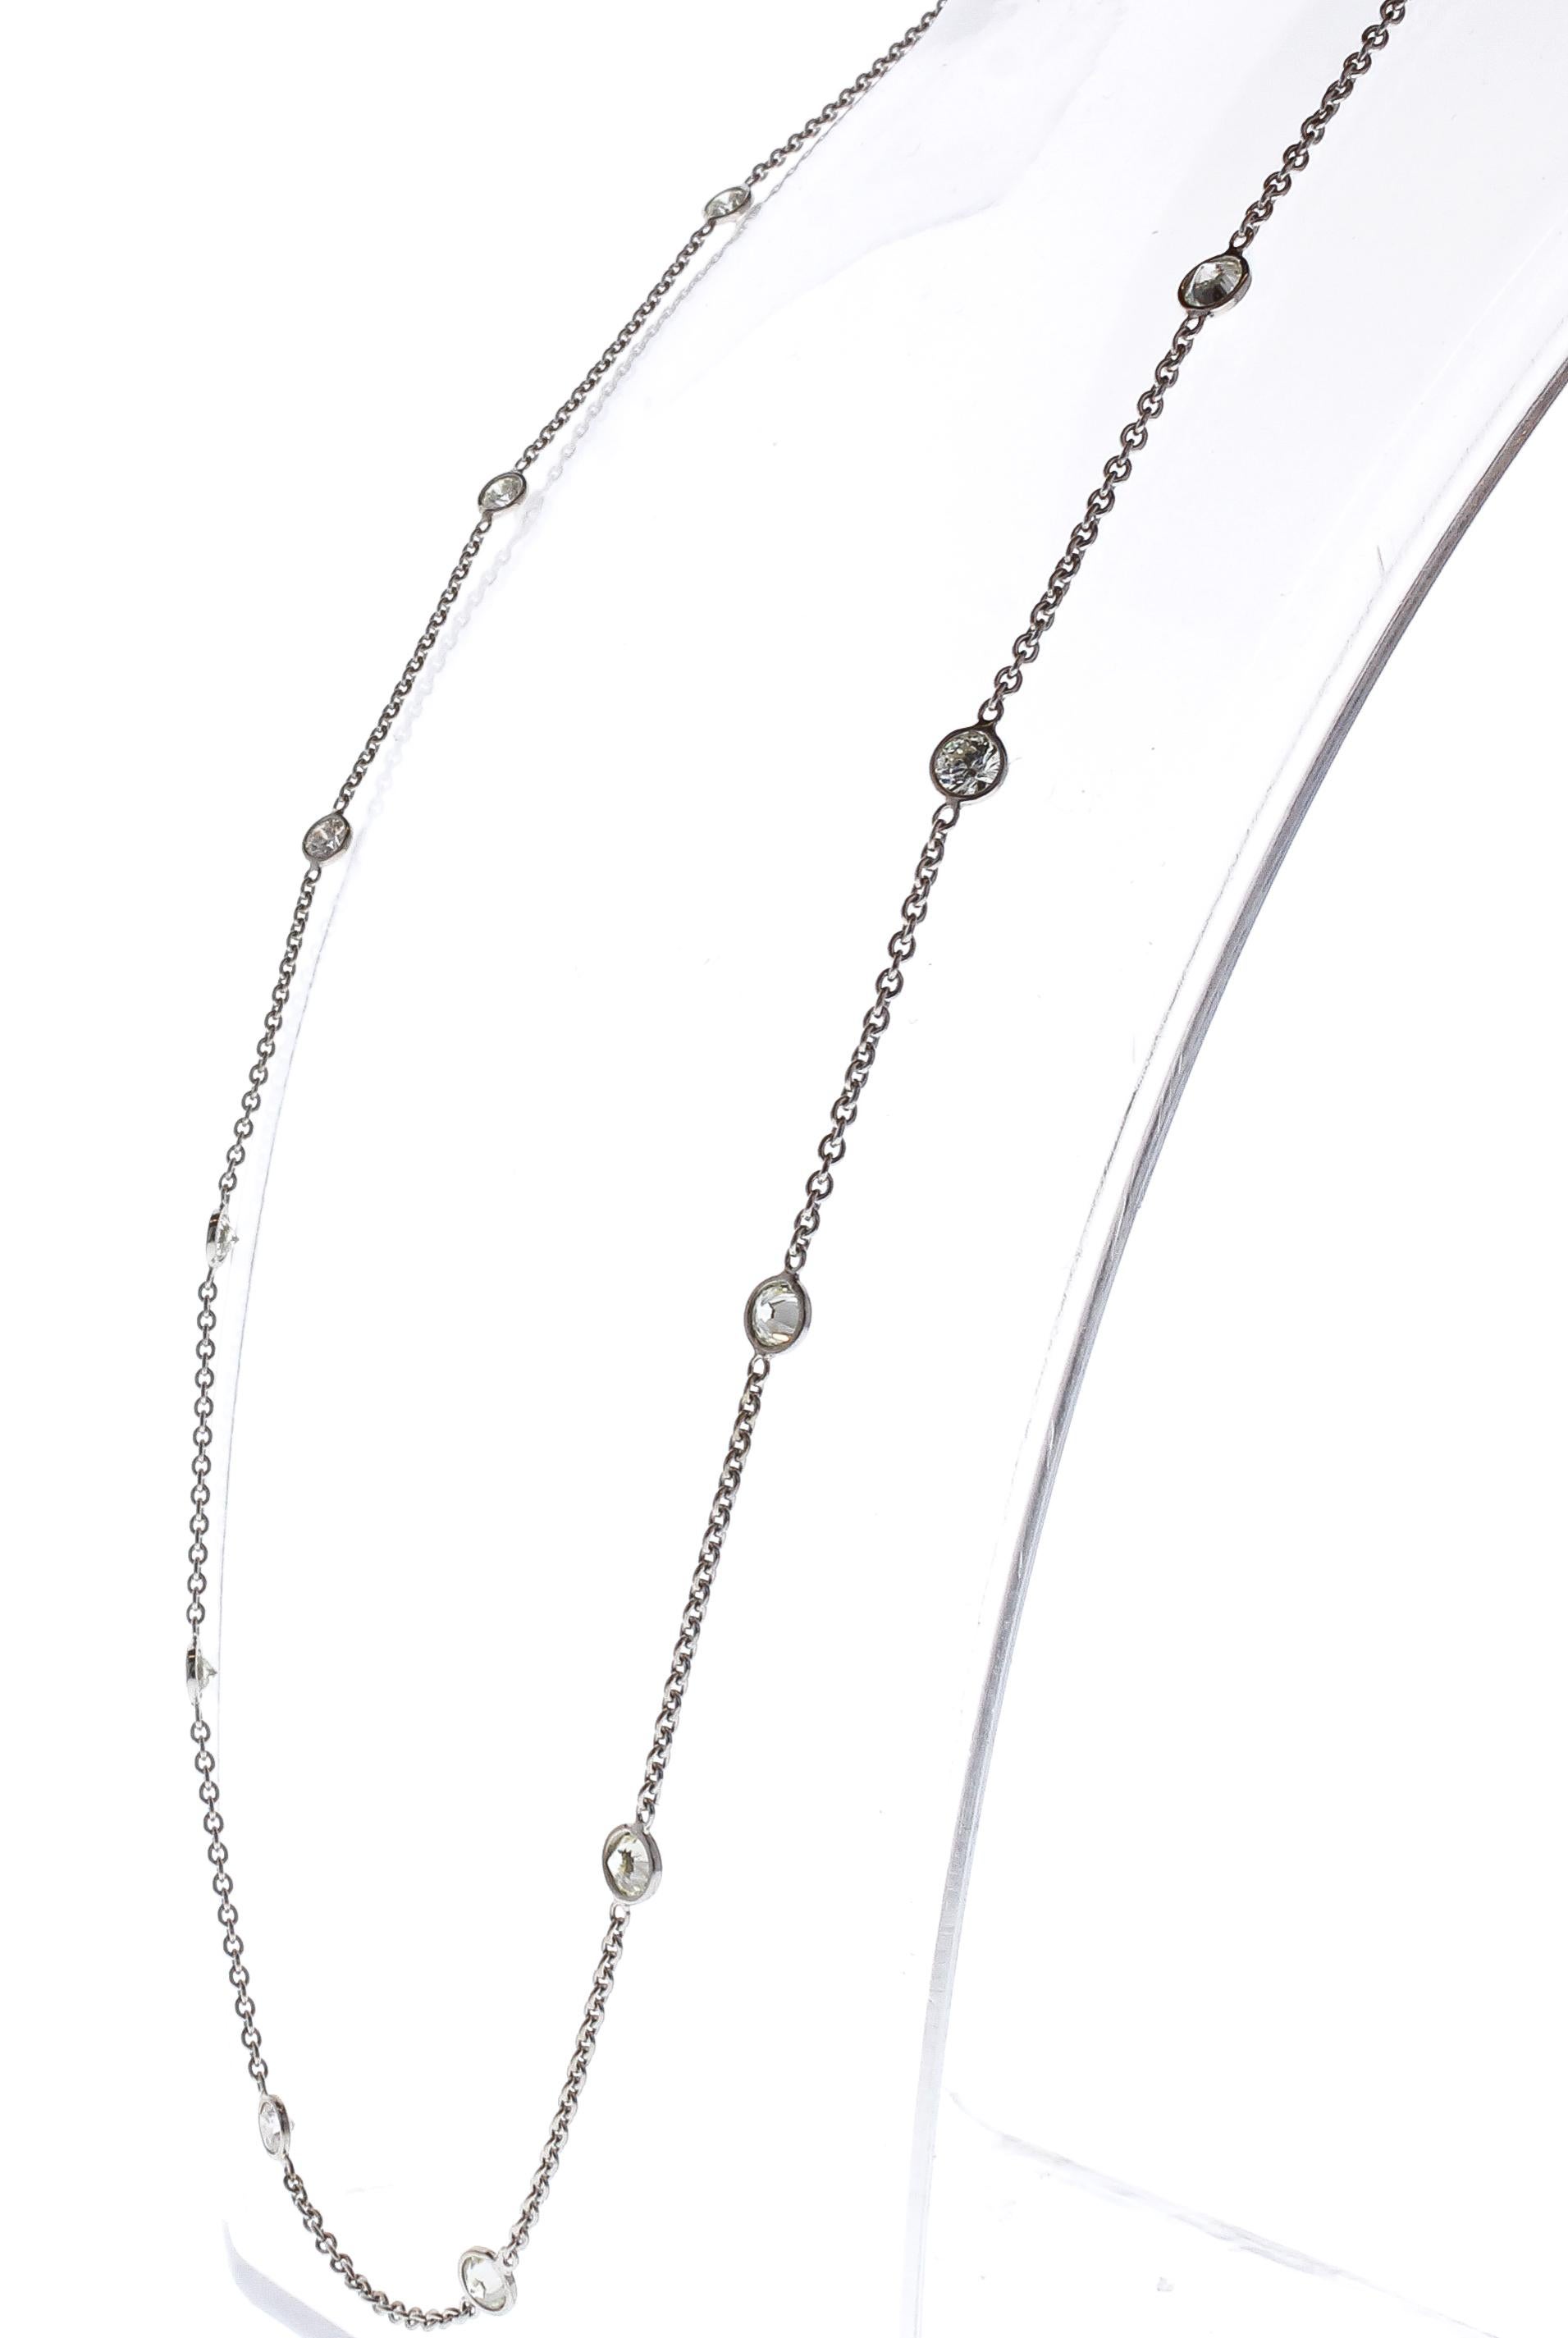 Contemporary 2.81 Carat Total Diamonds by the Yard Necklace in 14 Karat White Gold For Sale